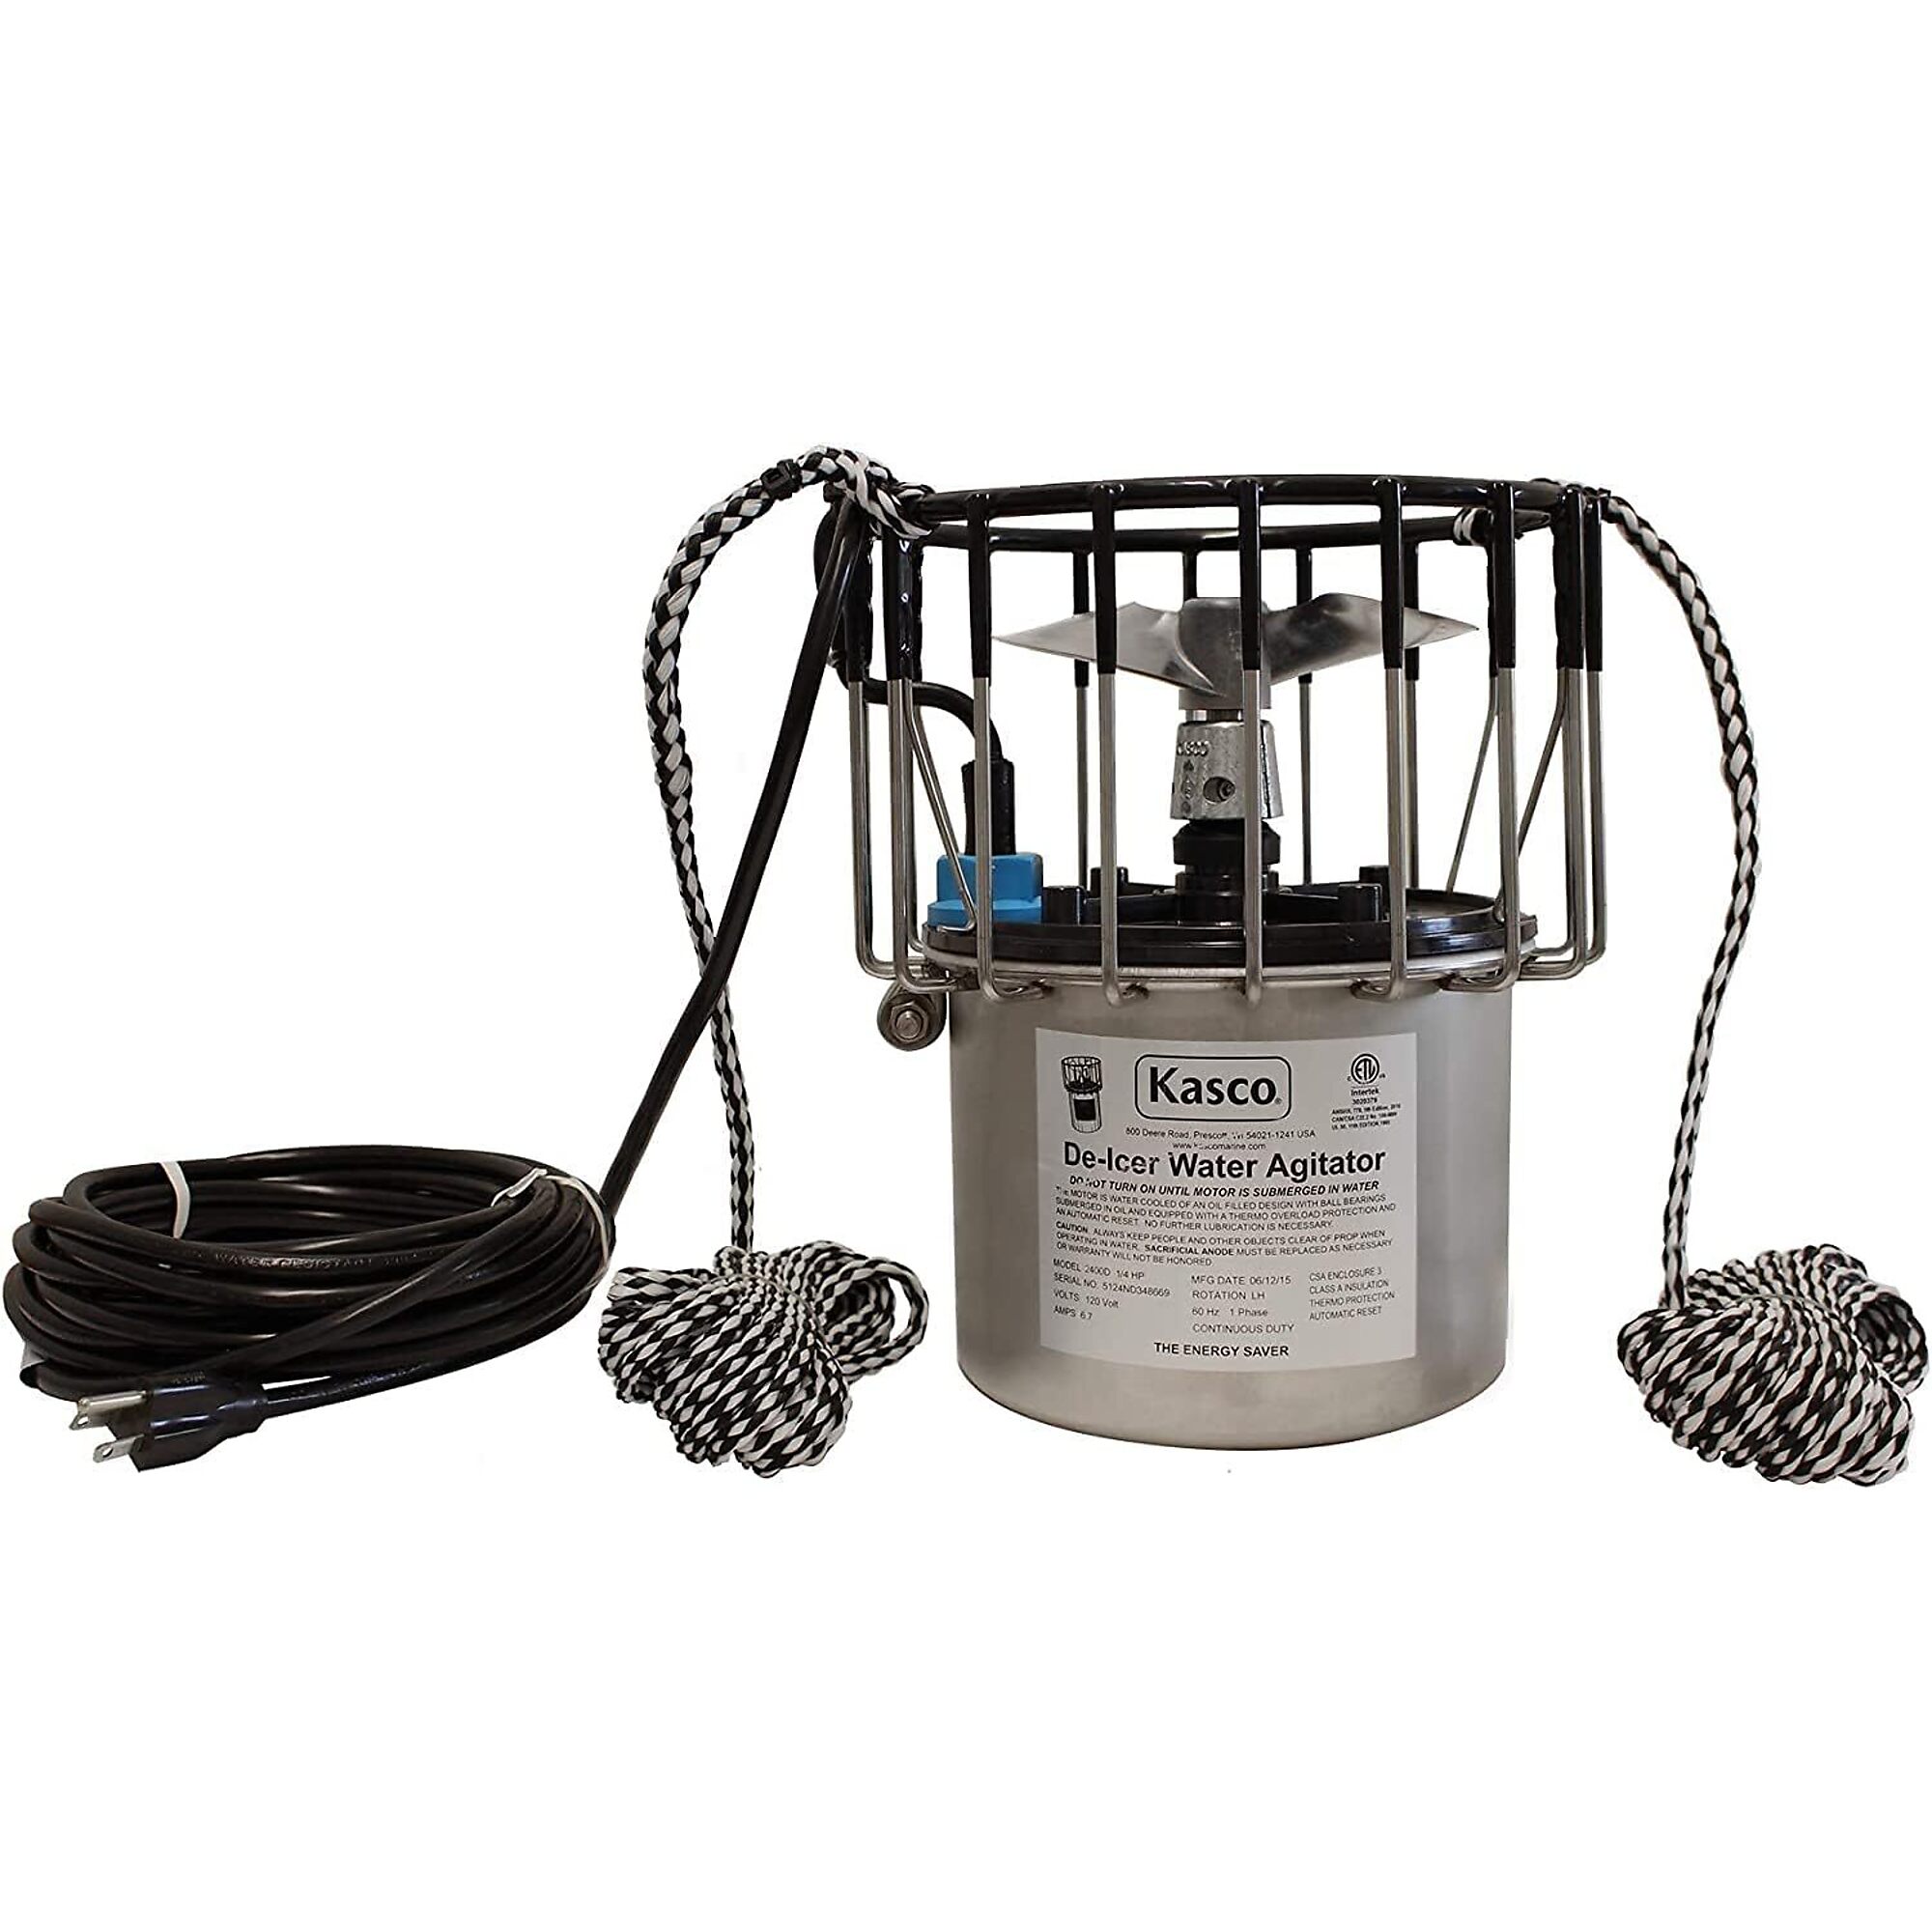 Kasco, De-icer Single Phase for Pond and Lake Bubbler, Volts 120 Power Cord Length 150 ft, Model 2400D150